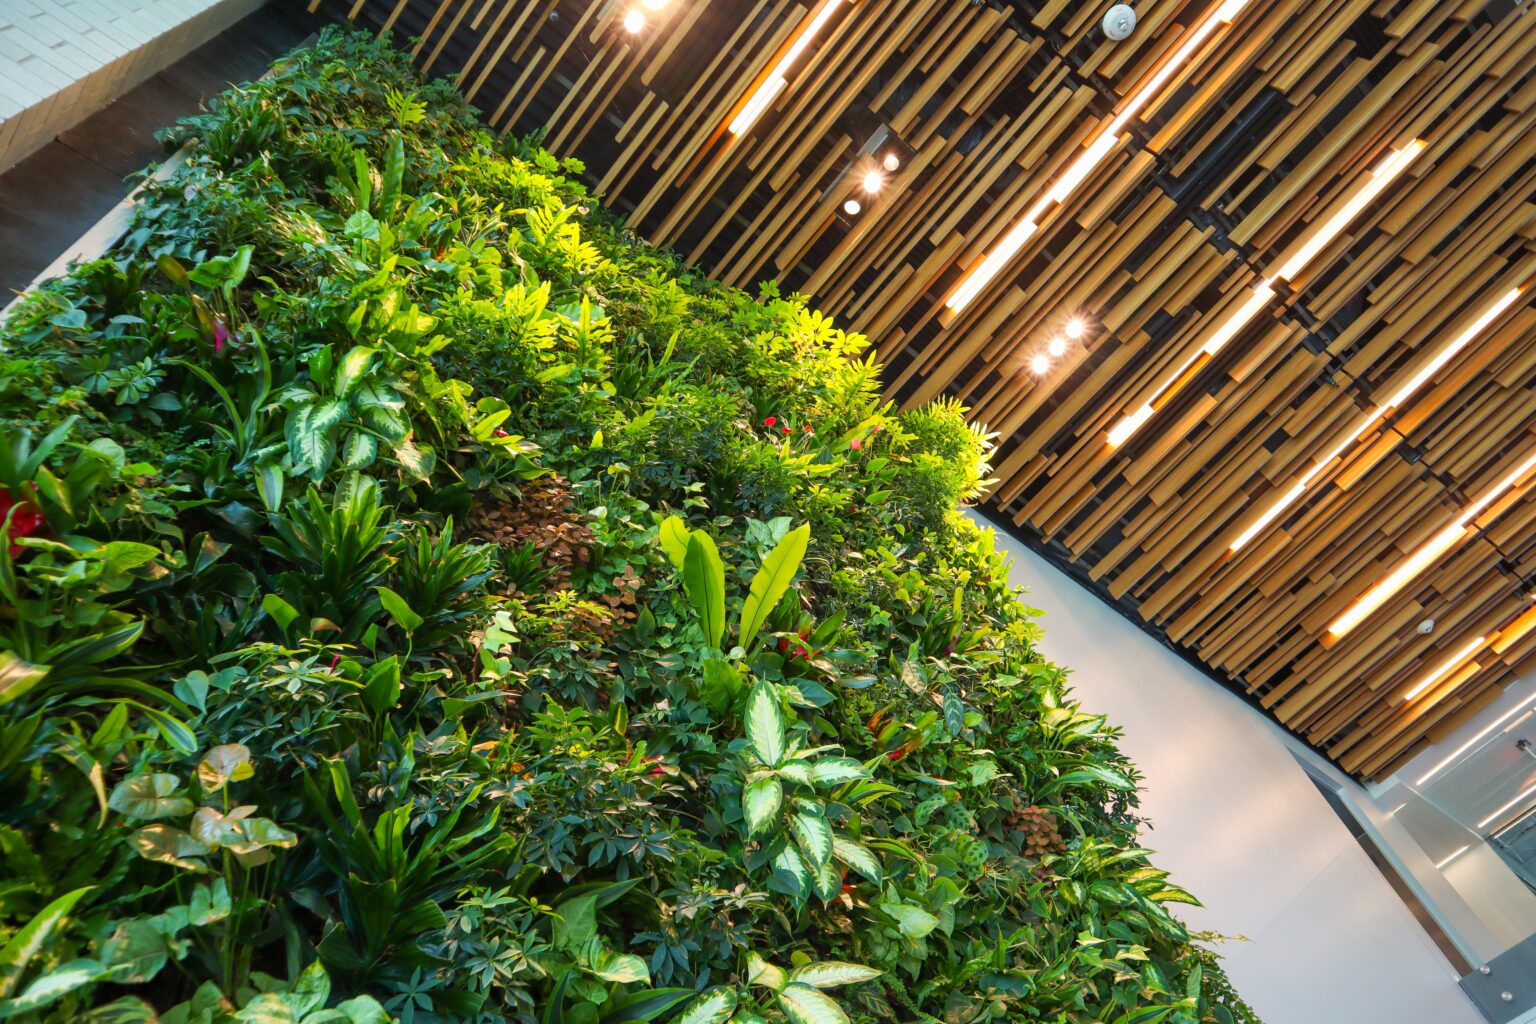 Vibrant green living wall with bright green plants floor to ceiling in an office building with light natural wood paneling on ceiling.